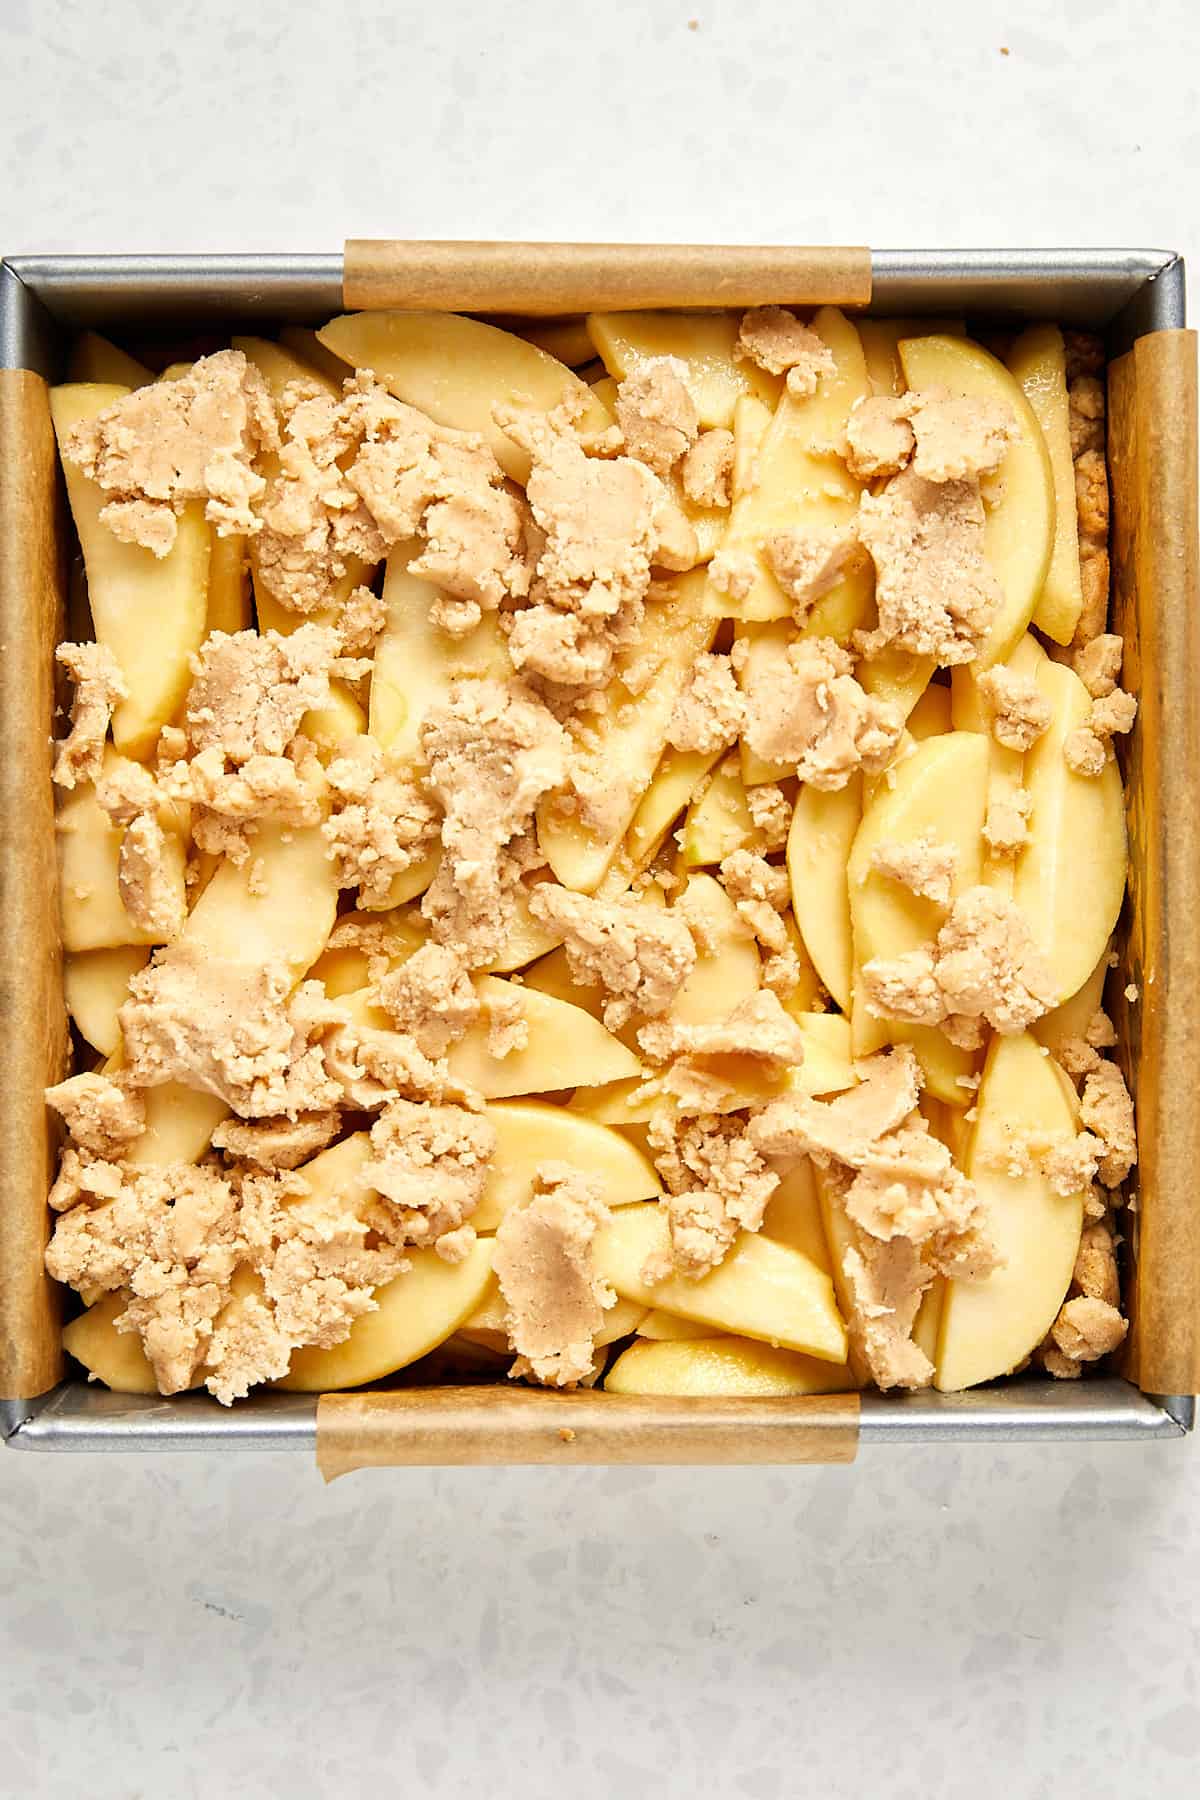 sliced apples on top of cooked dough with raw dough crumbled on top.